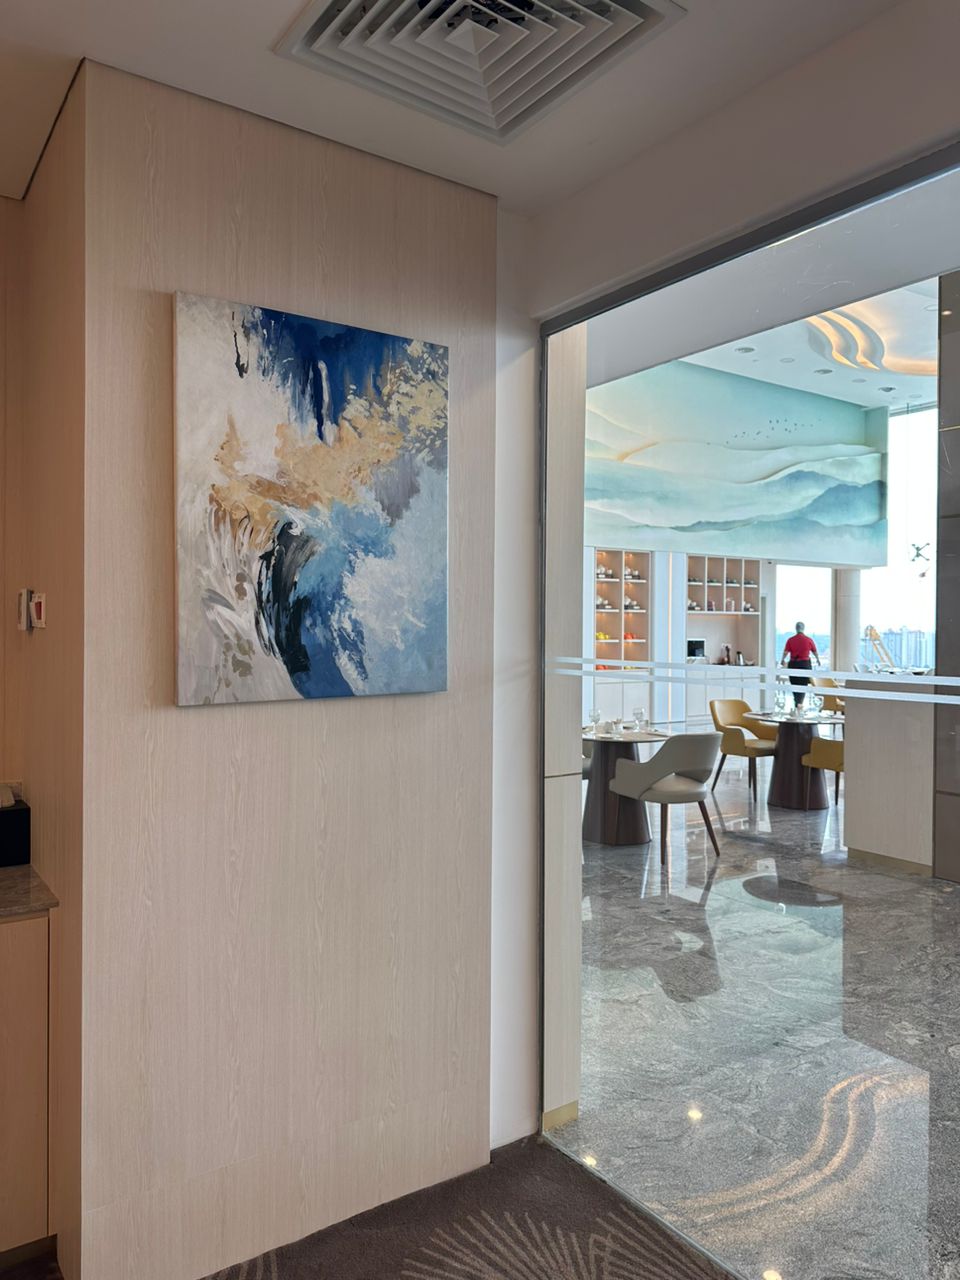 Affordable Custom Made Hand-painted Modern Minimalist Blue and Gold Abstract Oil Painting In Malaysia Office/ Home @ ArtisanMalaysia.com